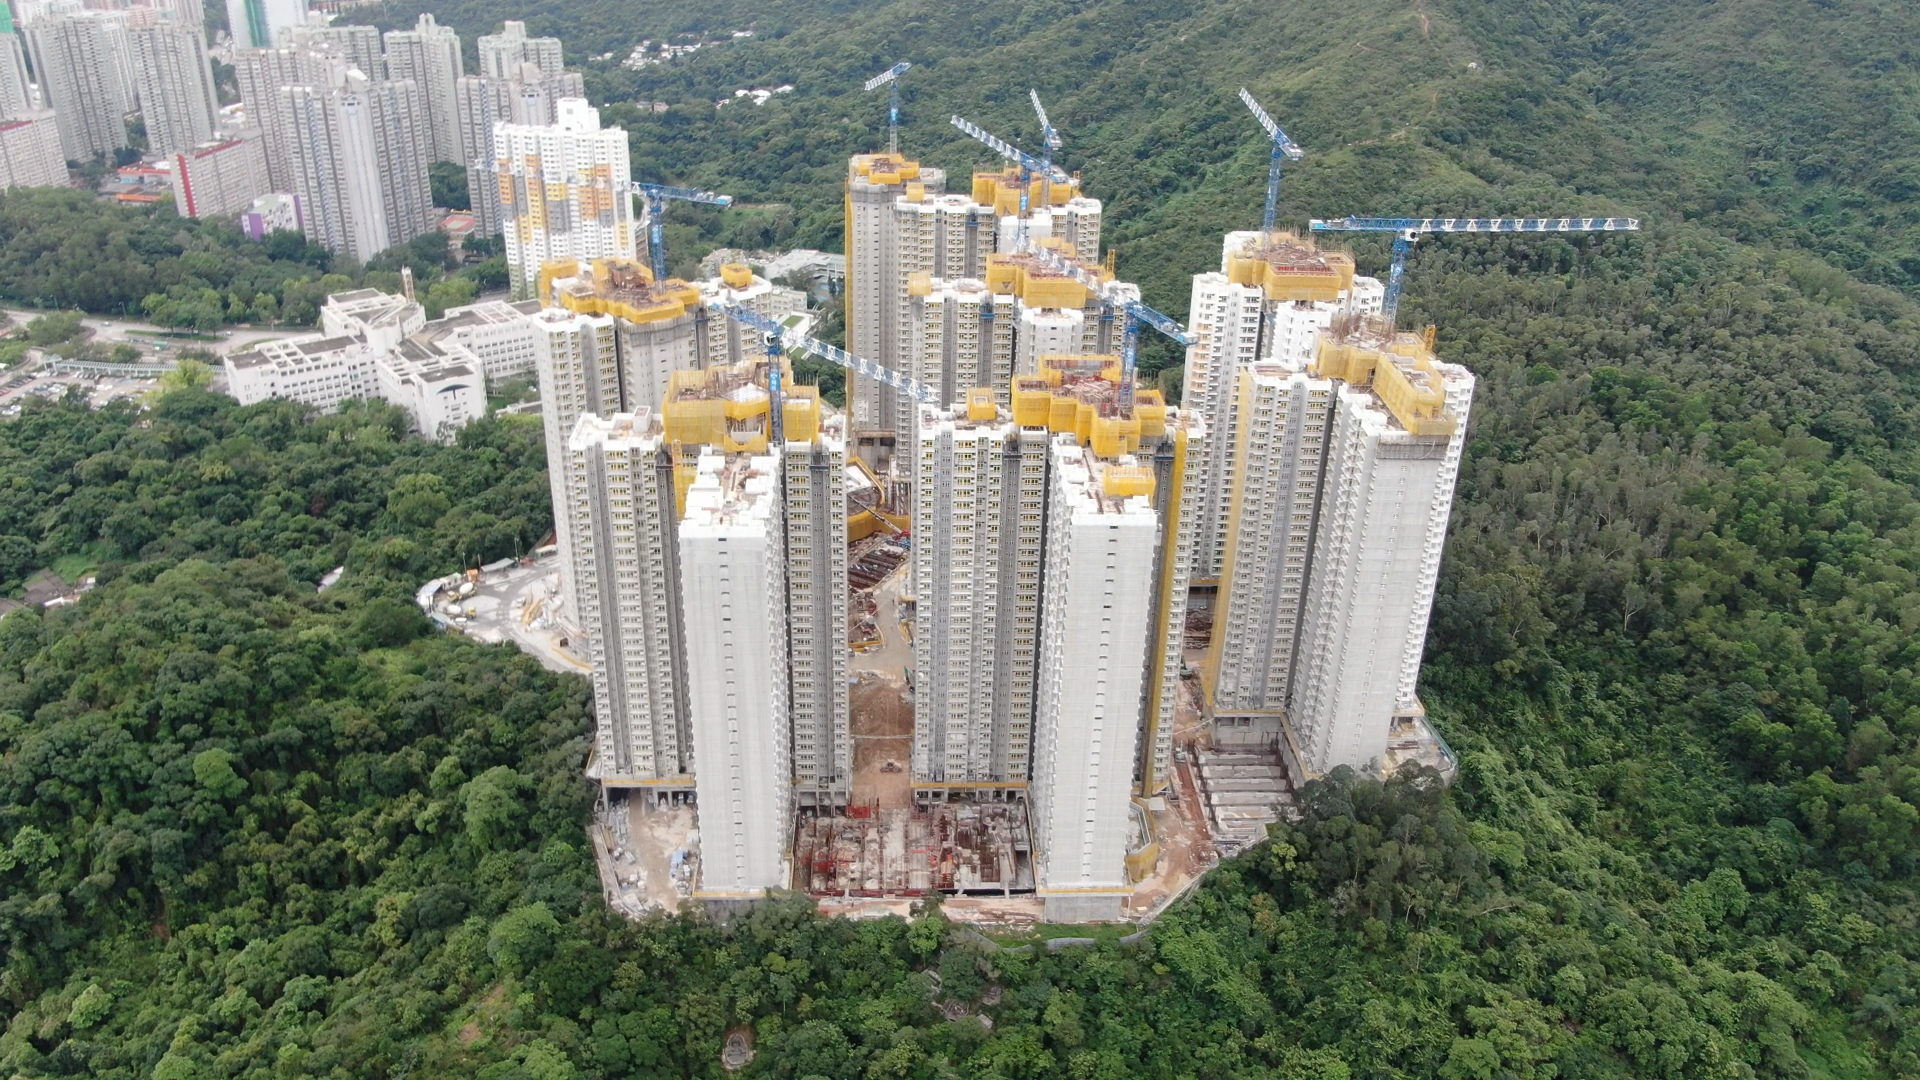 The Secretary for Housing, Ms Winnie Ho, visited Tai Po Area 9 this morning (July 7) to grasp the latest progress of the public rental housing development projects. Photo shows the aerial view of Fu Tip Estate, which is under construction.